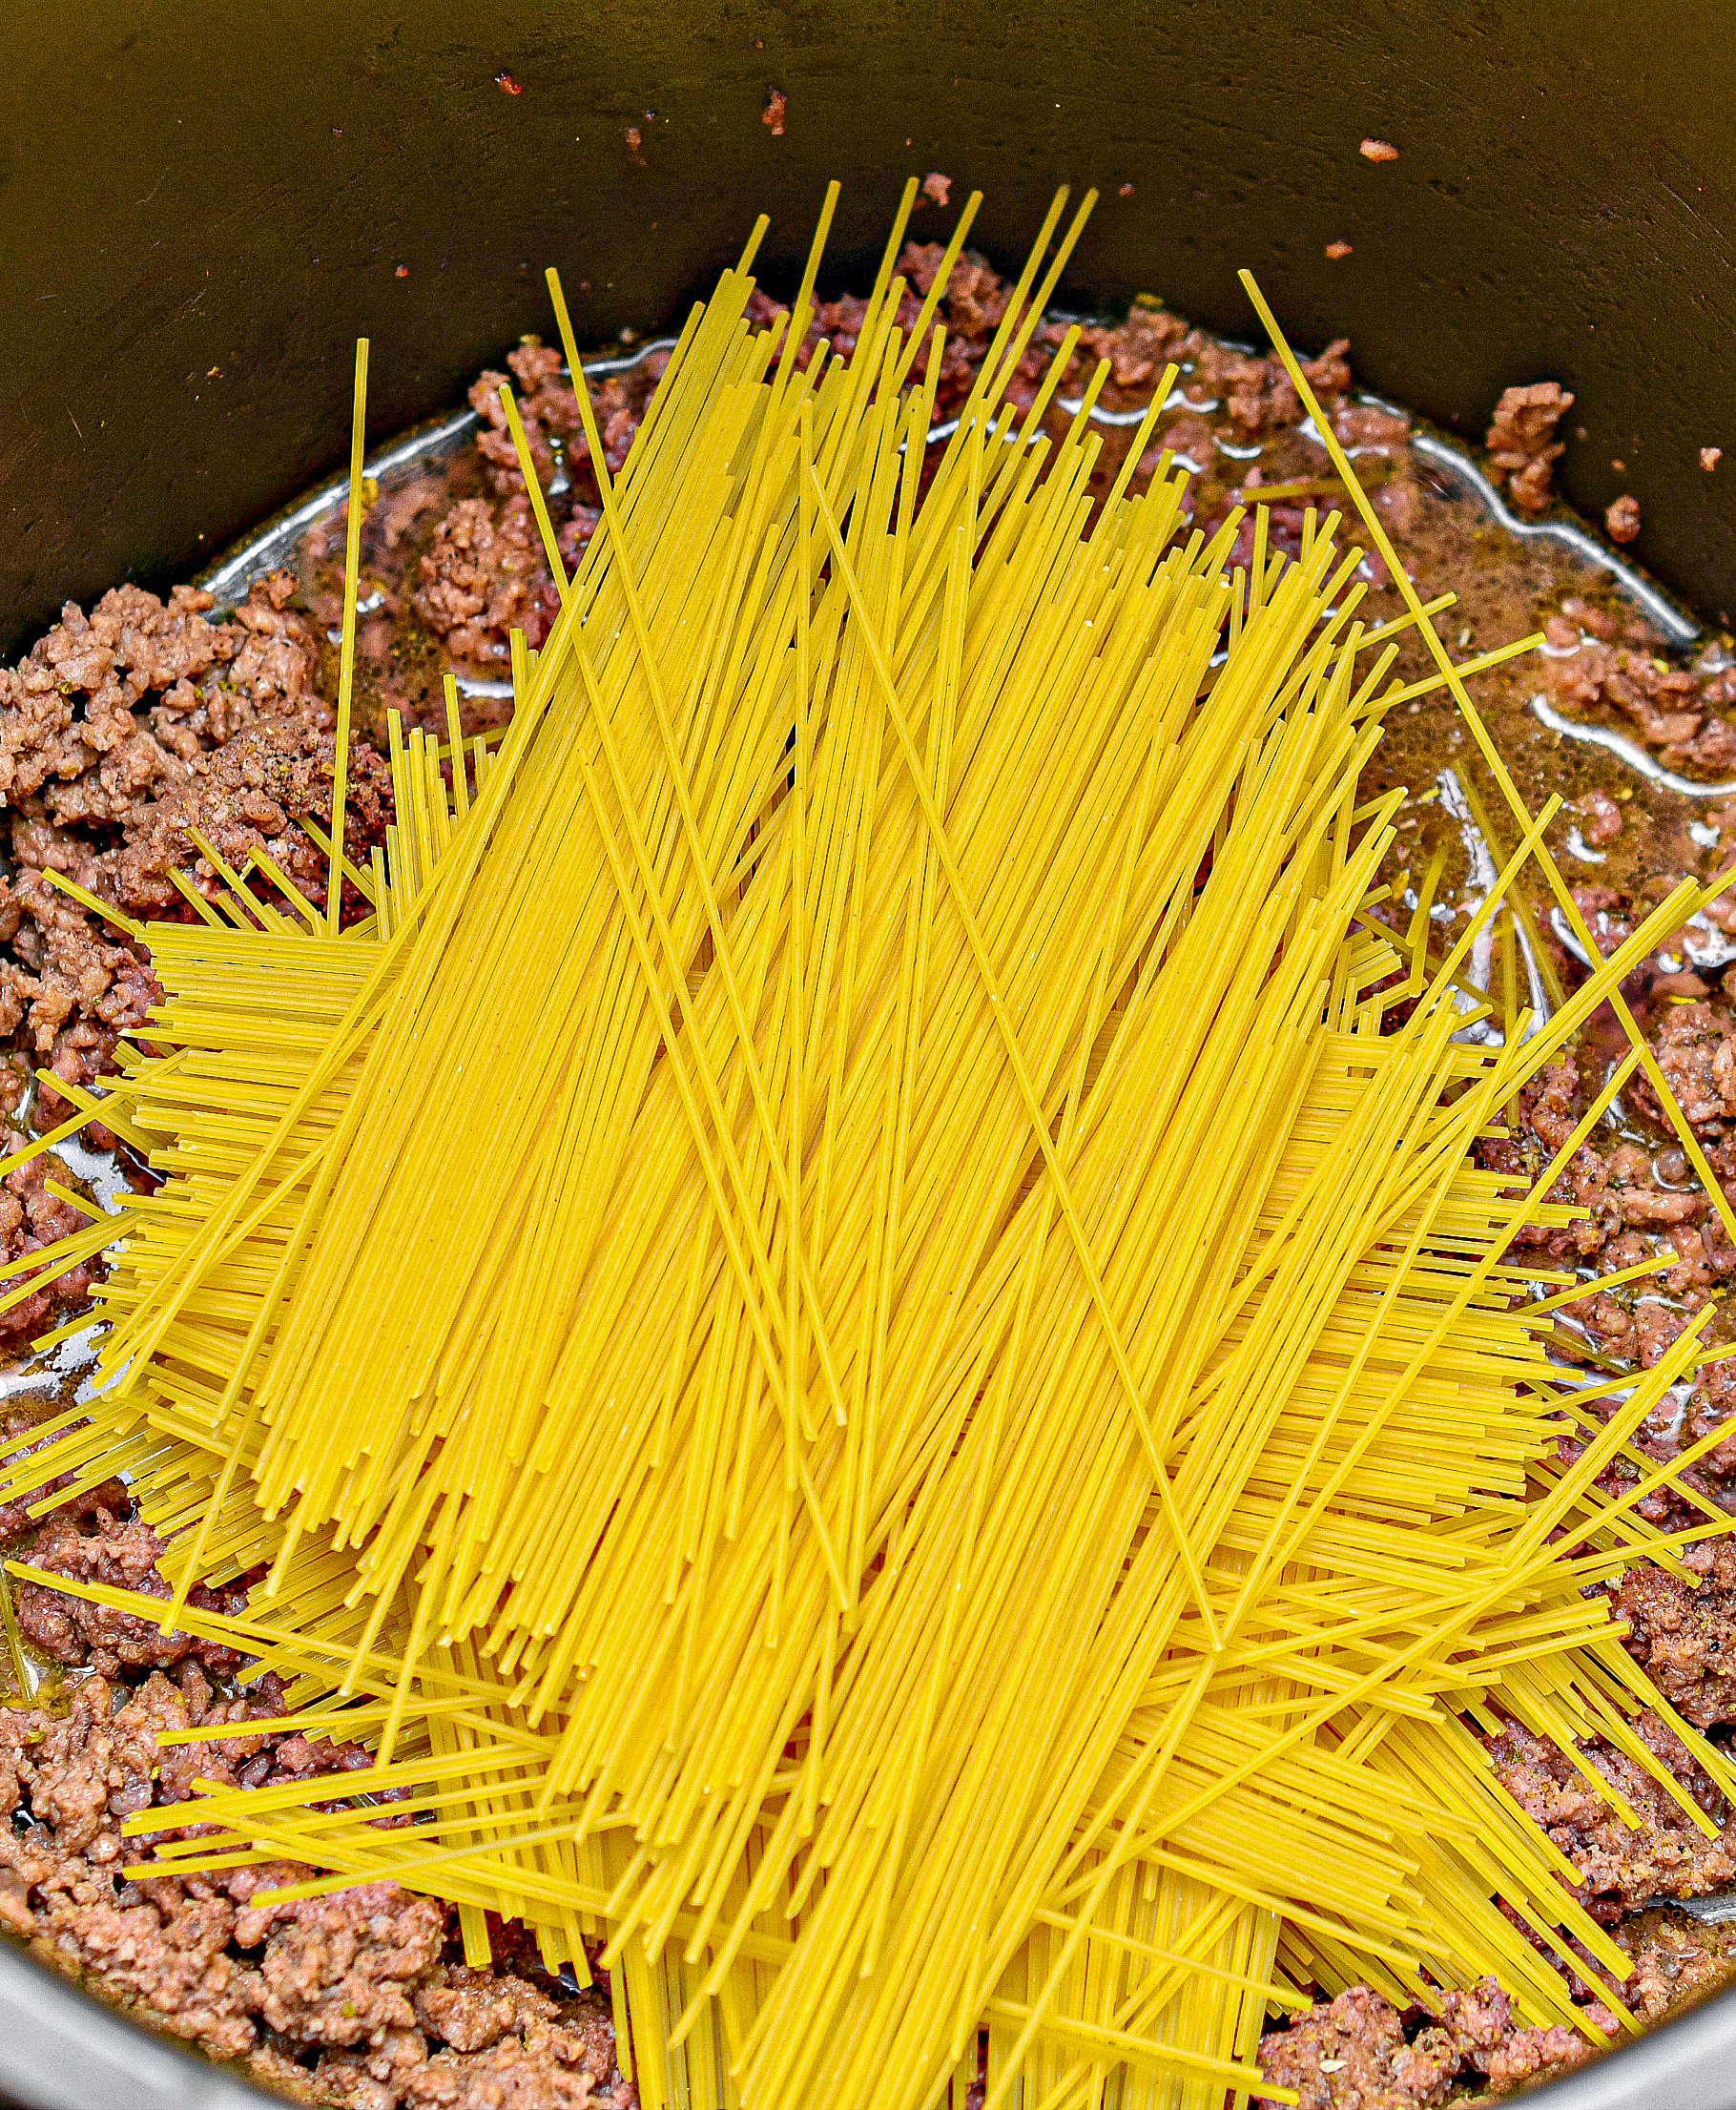 Break the spaghetti noodles in half, and layer them a little at a time on top of the meat mixture in the Instant Pot, layering the noodles in slightly different directions each time.